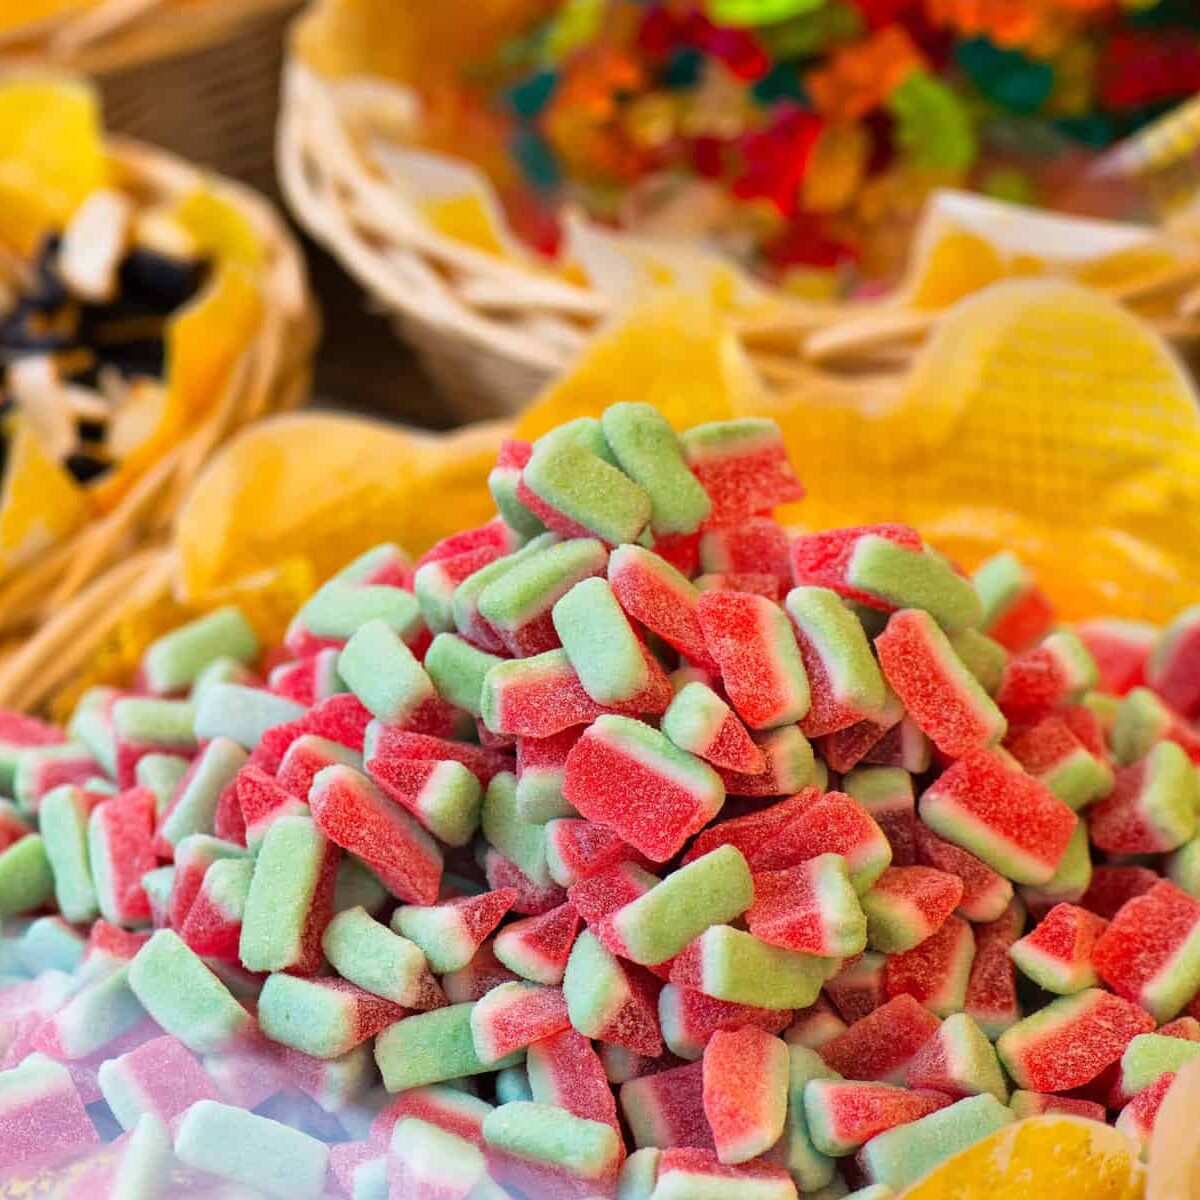 Assorted colorful candies at street markets